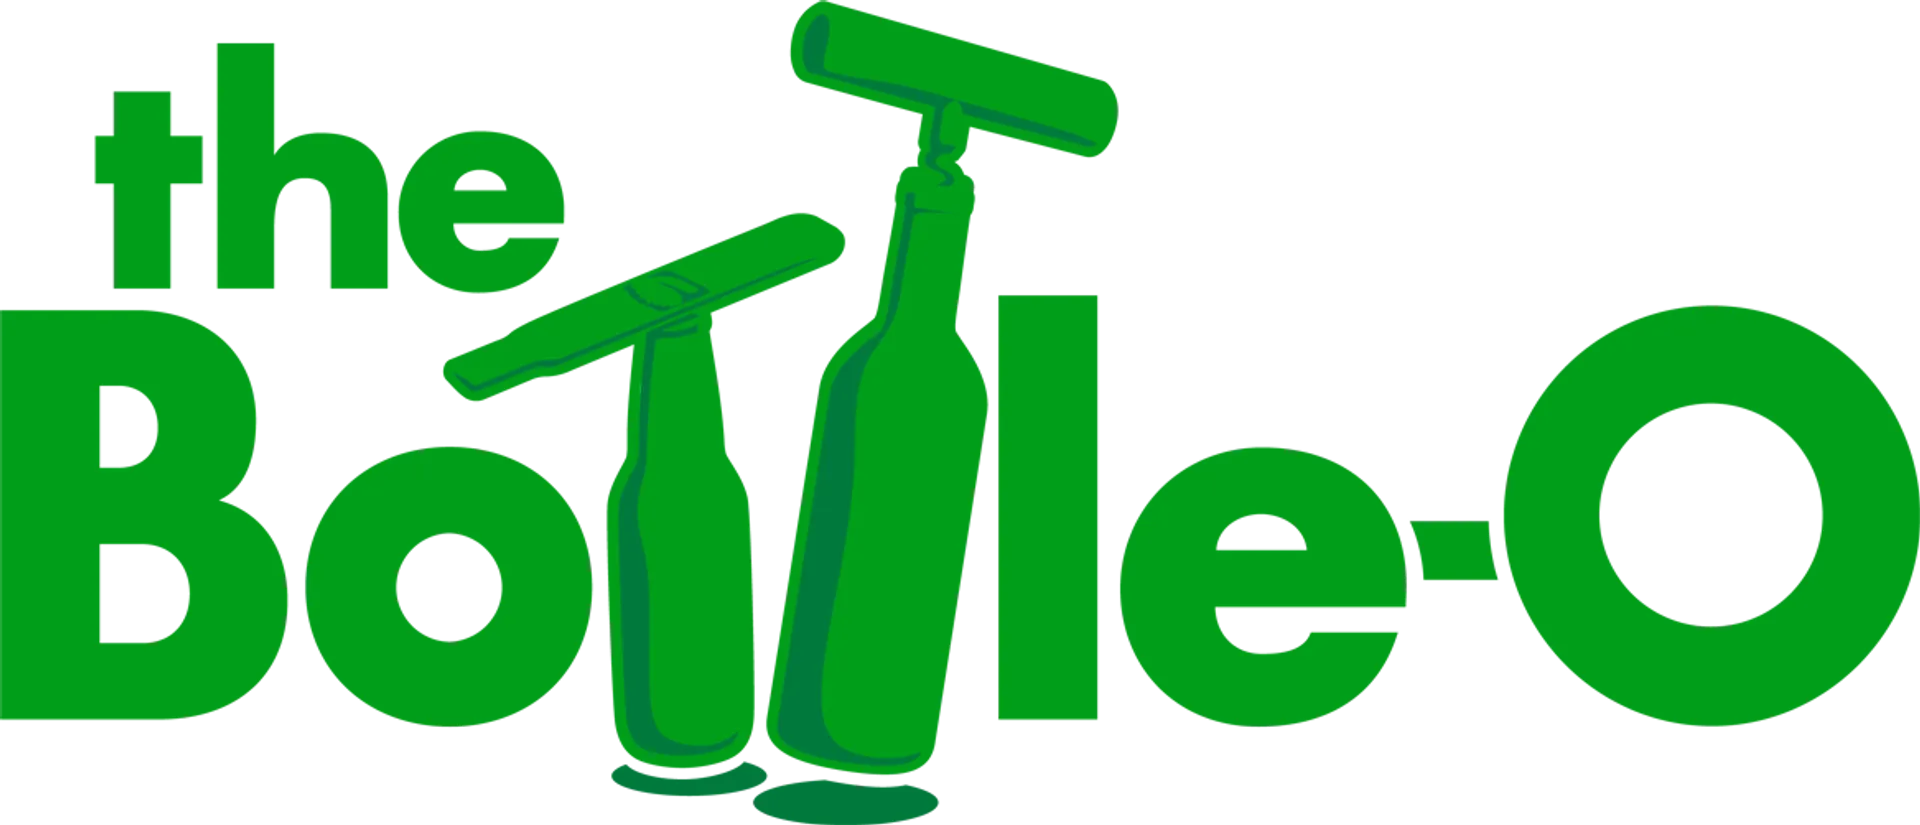 THE BOTTLE-O logo of current catalogue